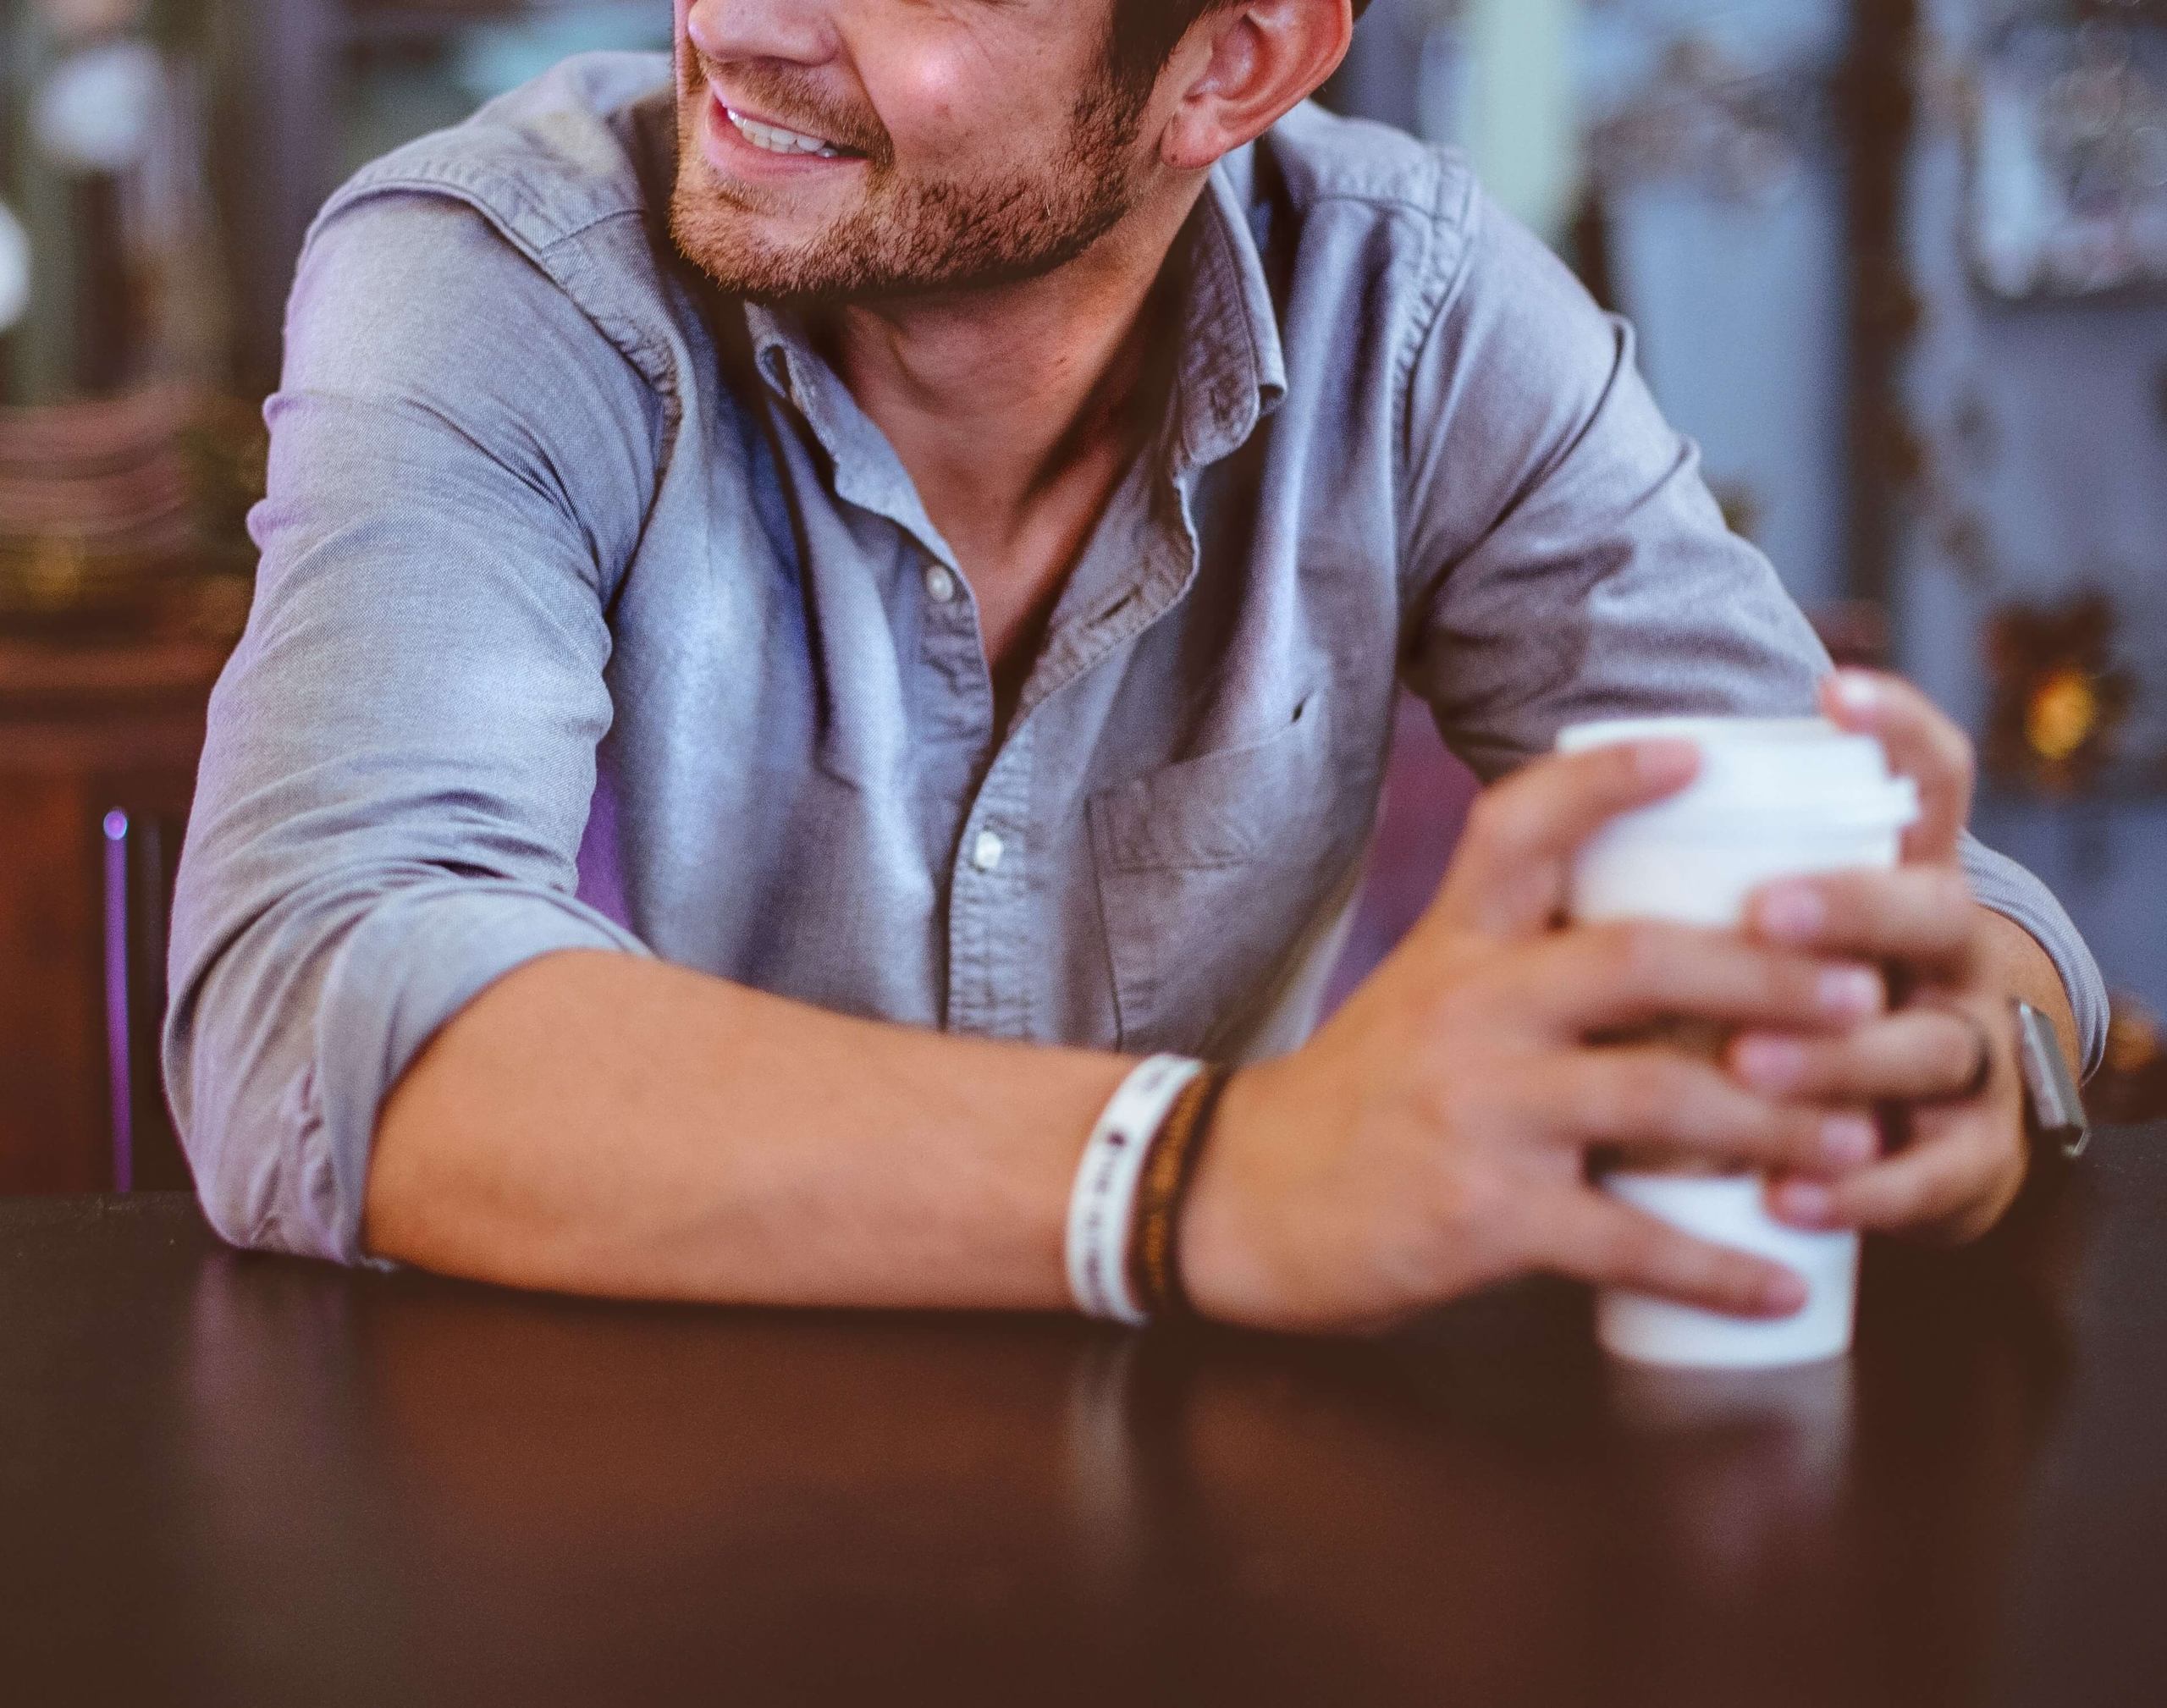 Image have a smiling man sitting at a table, holding a coffee cup. If you struggle with being an introvert learn how therapy for introverts in Austin, TX can help.